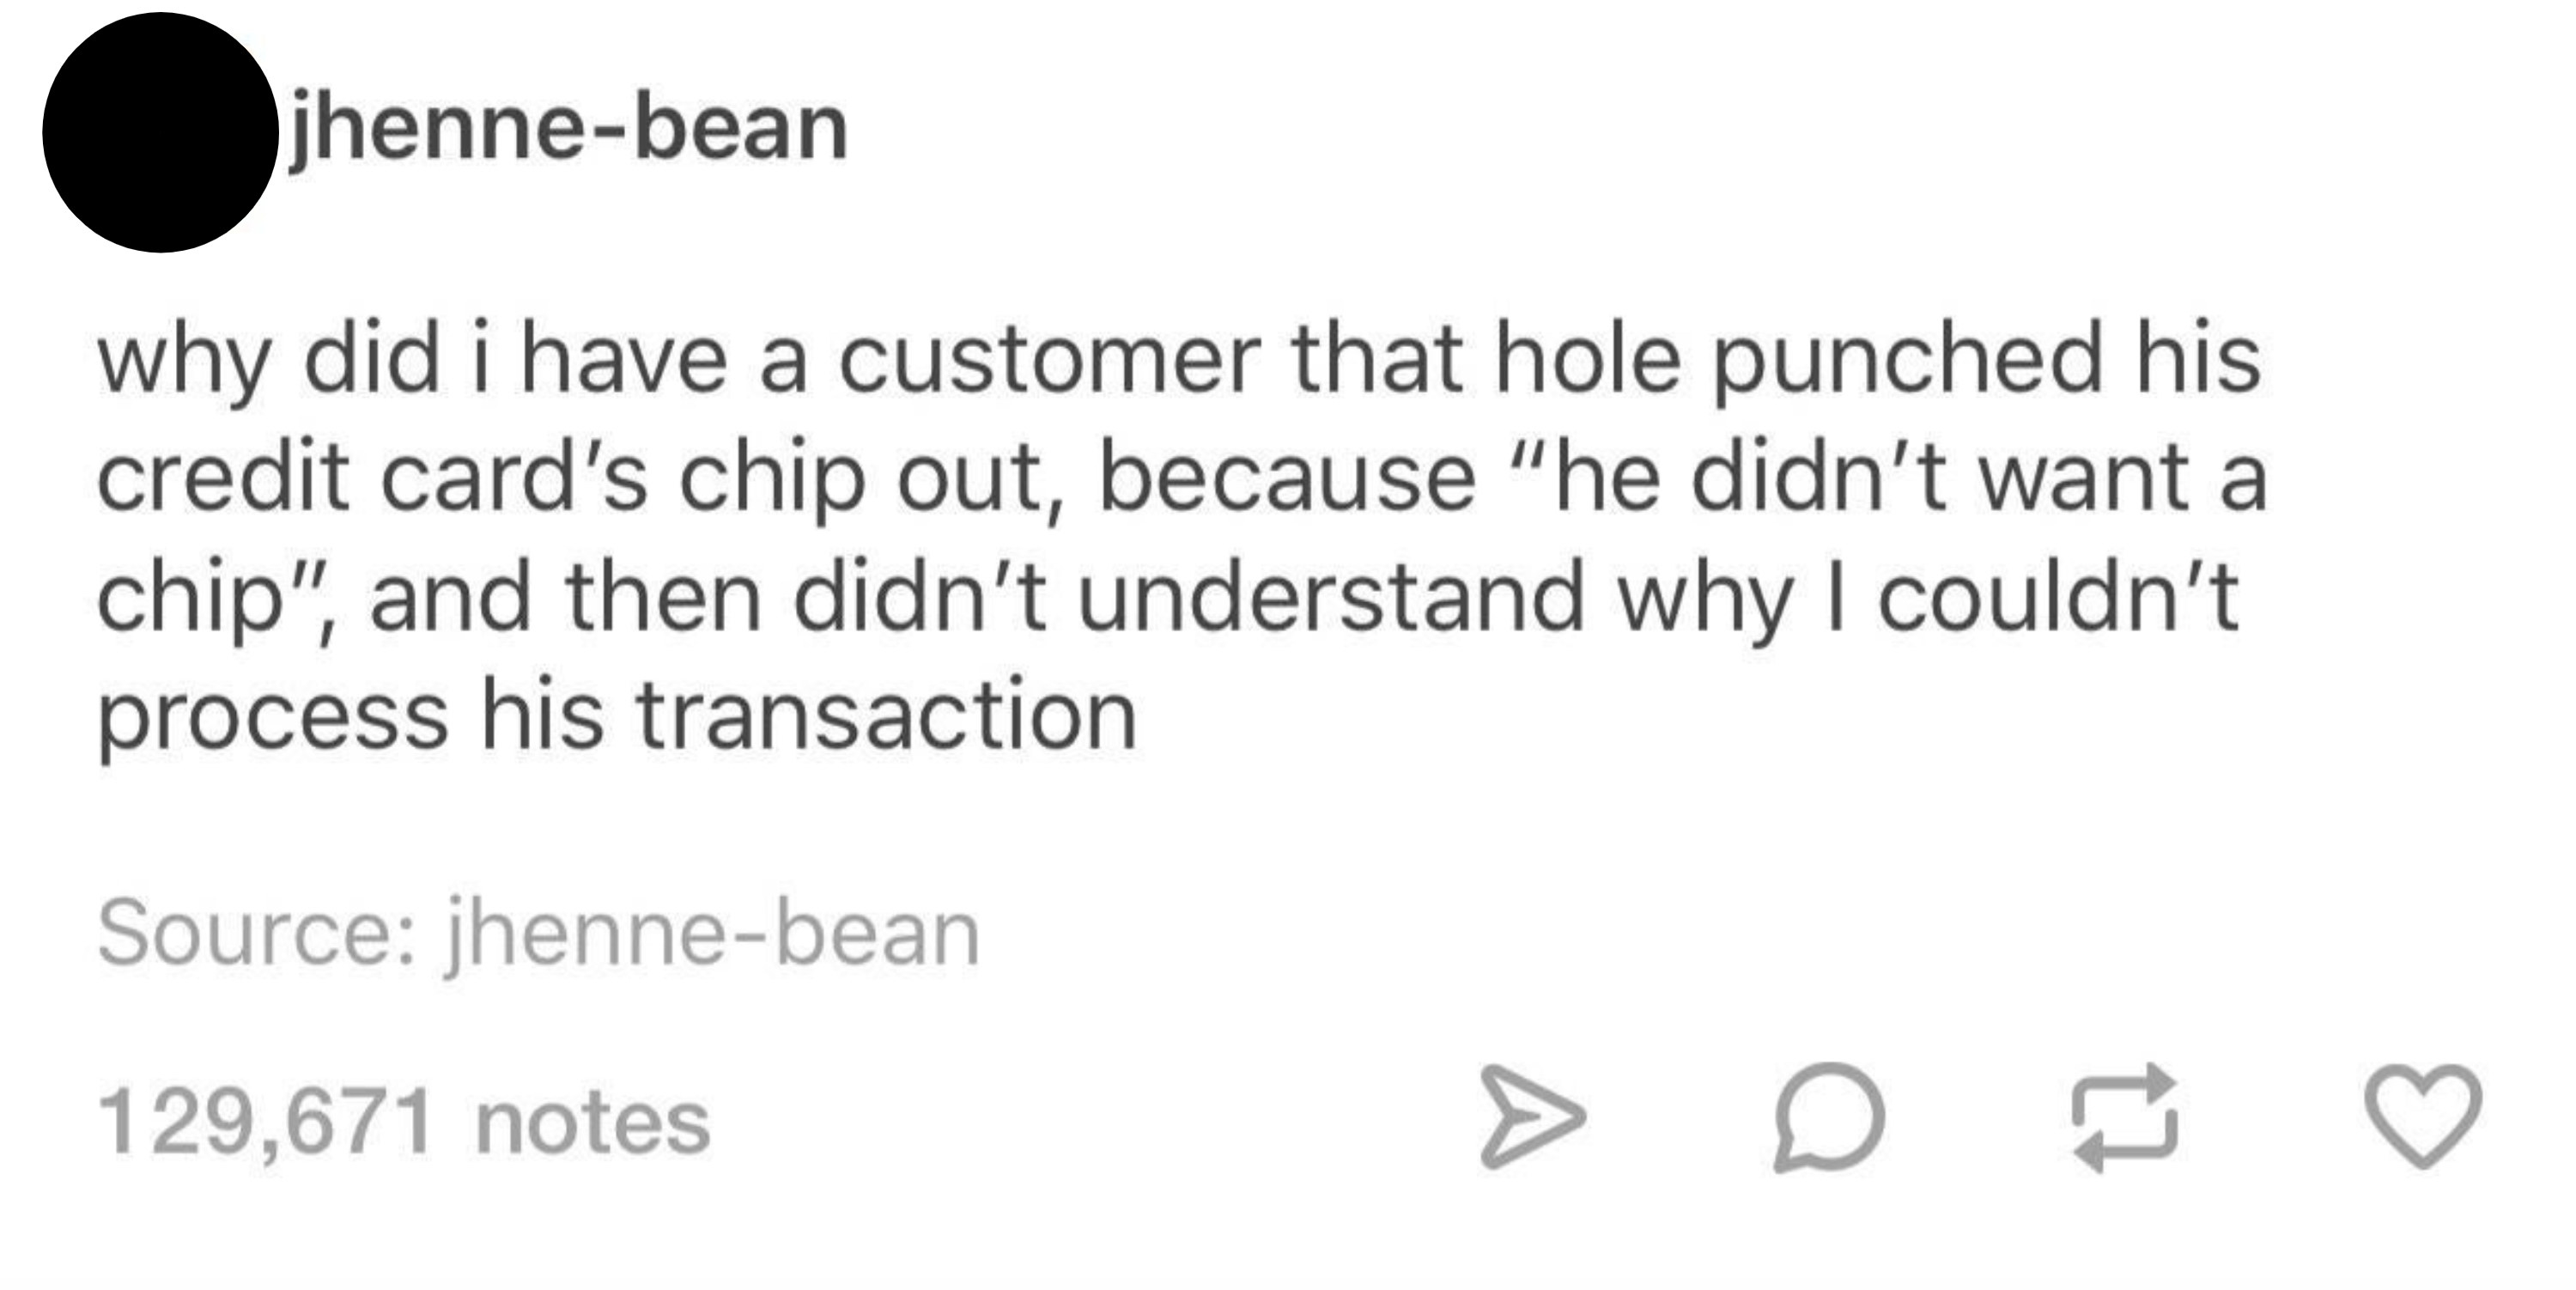 tumblr post reading why did i have a customer that hole punched his credit card chip&#x27;s out because he didn&#x27;t want a chip